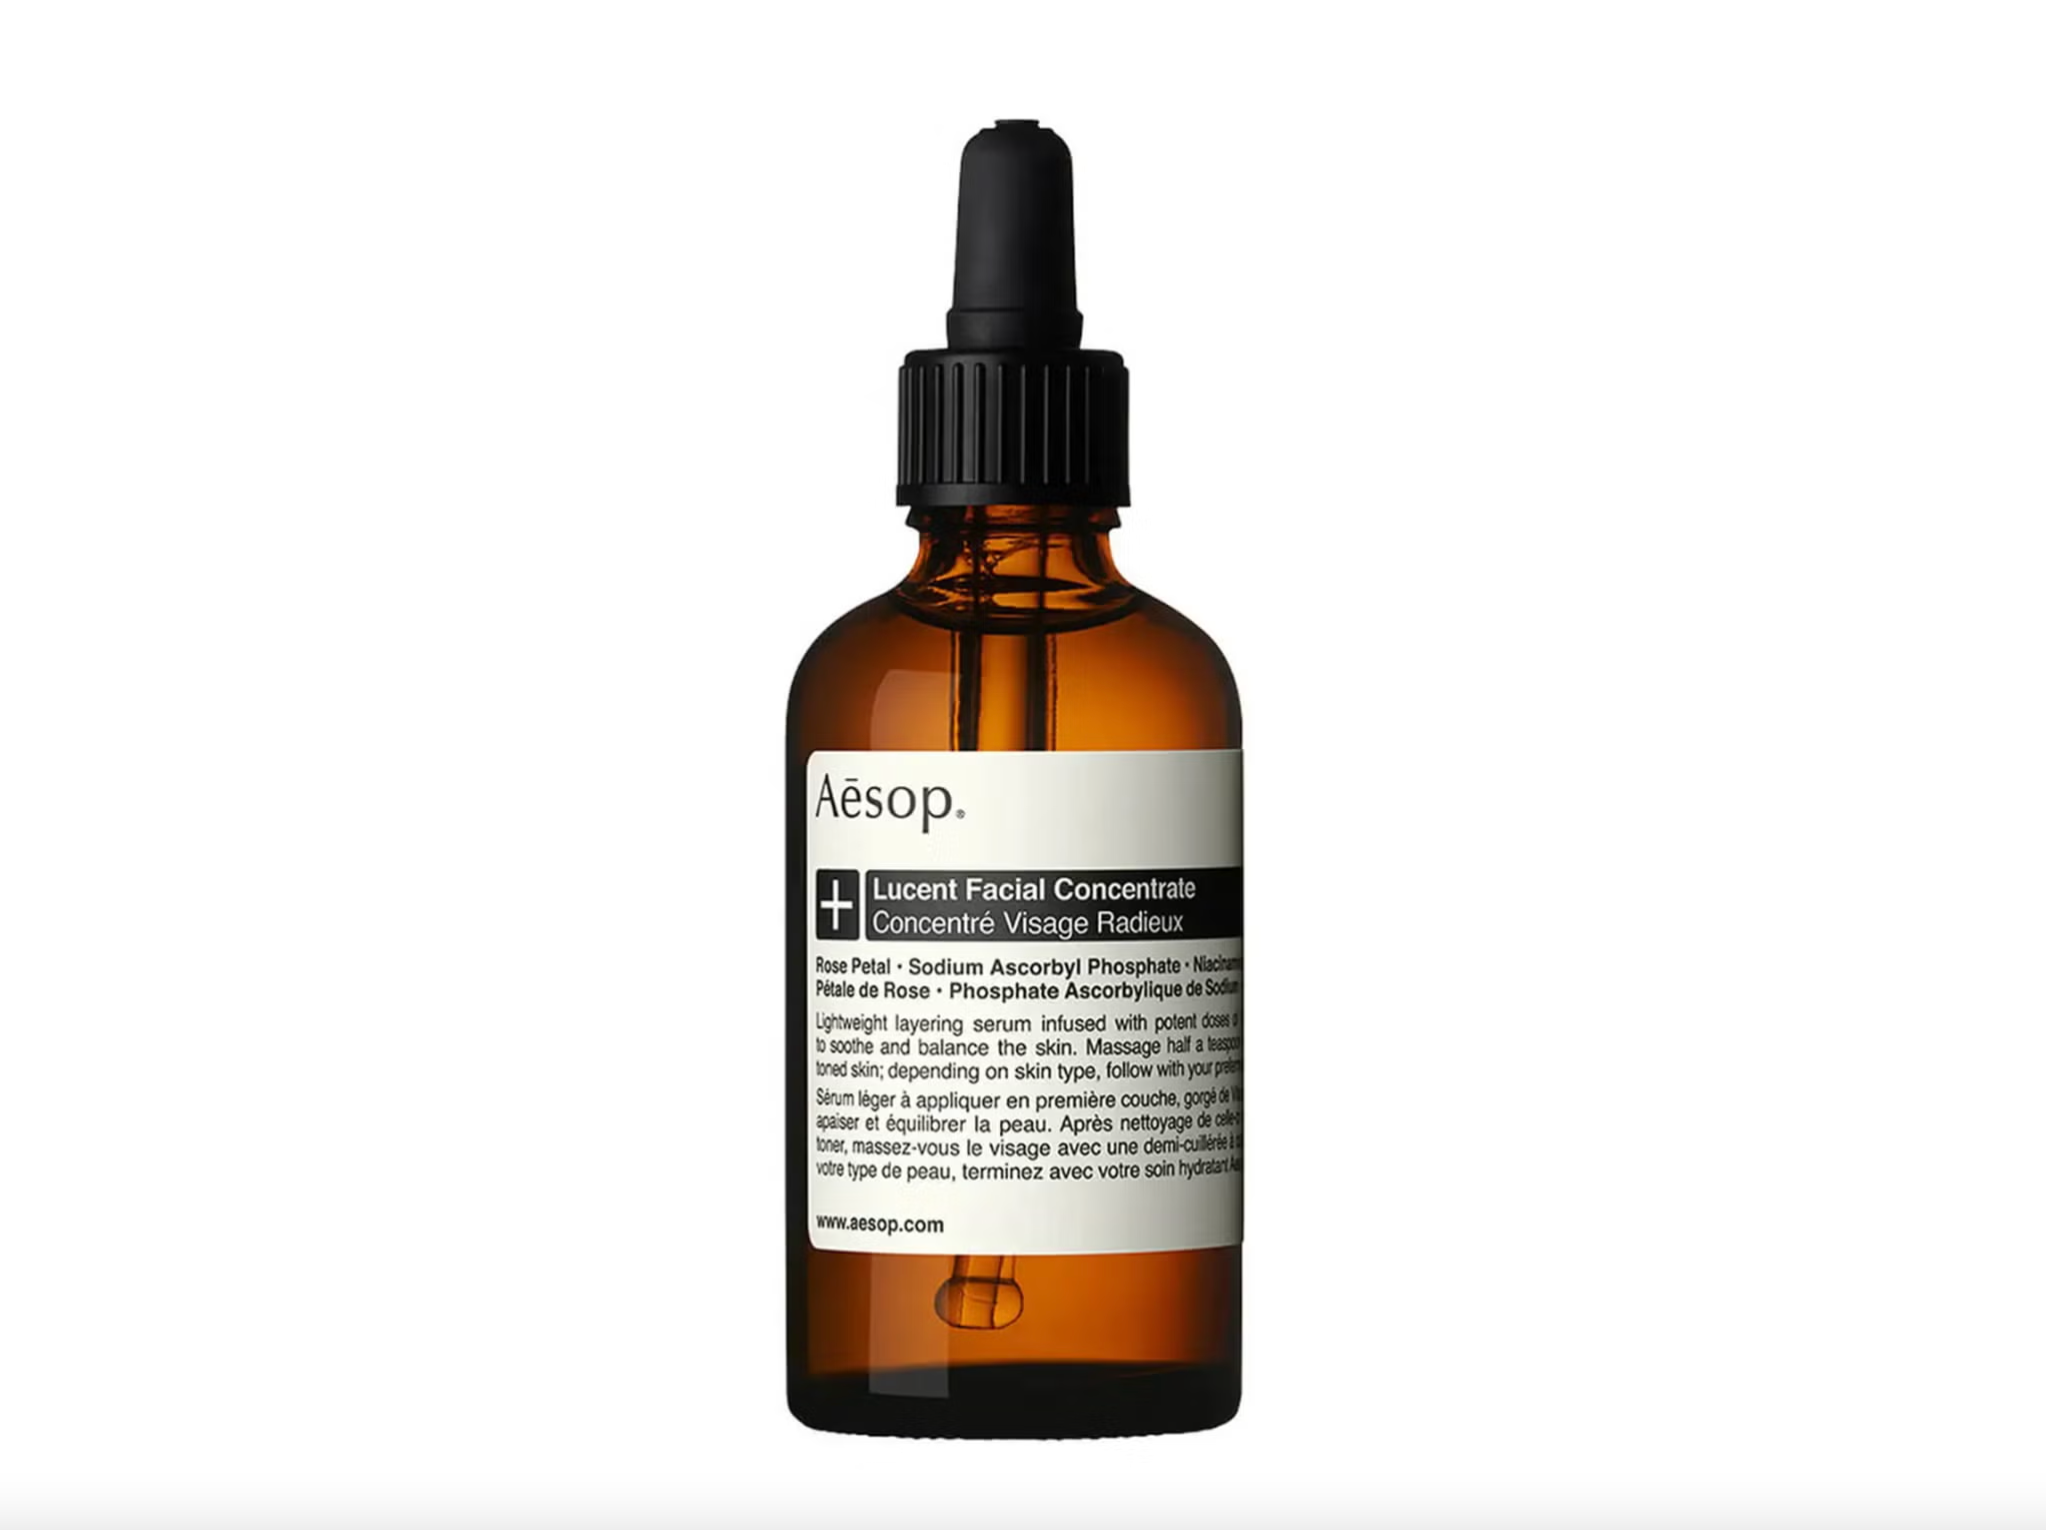 Tack dark spots and ageing with this lightweight vitamin C